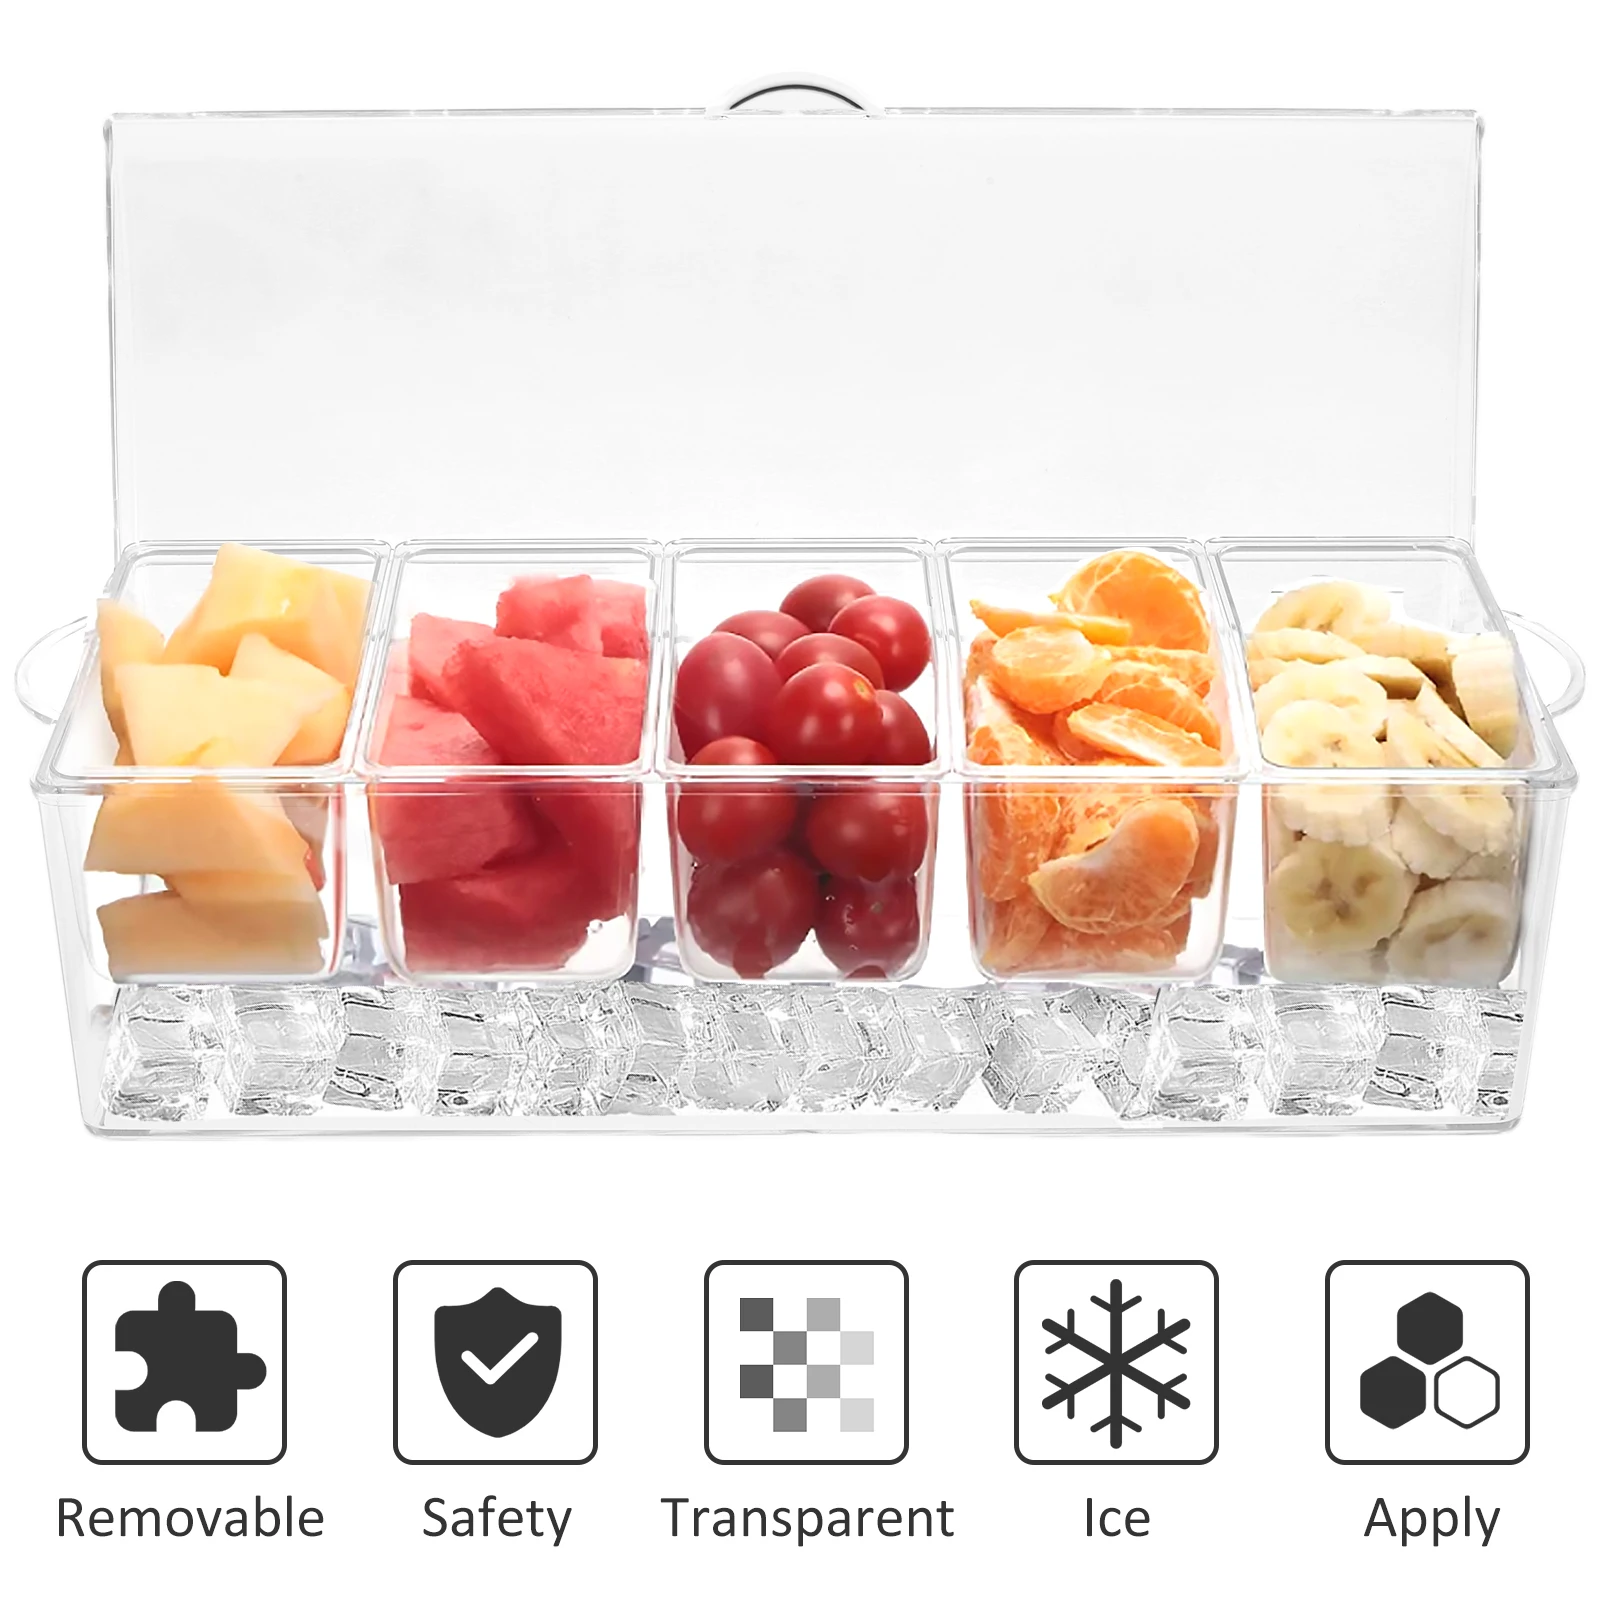 https://ae01.alicdn.com/kf/Se671876b4e1d4249b98fc8752dc78c5aU/5-Tray-Condiment-Server-with-Lid-Removable-Compartments-Reusable-Chilled-Condiment-Caddy-Clear-Food-Grade-Fruit.jpg